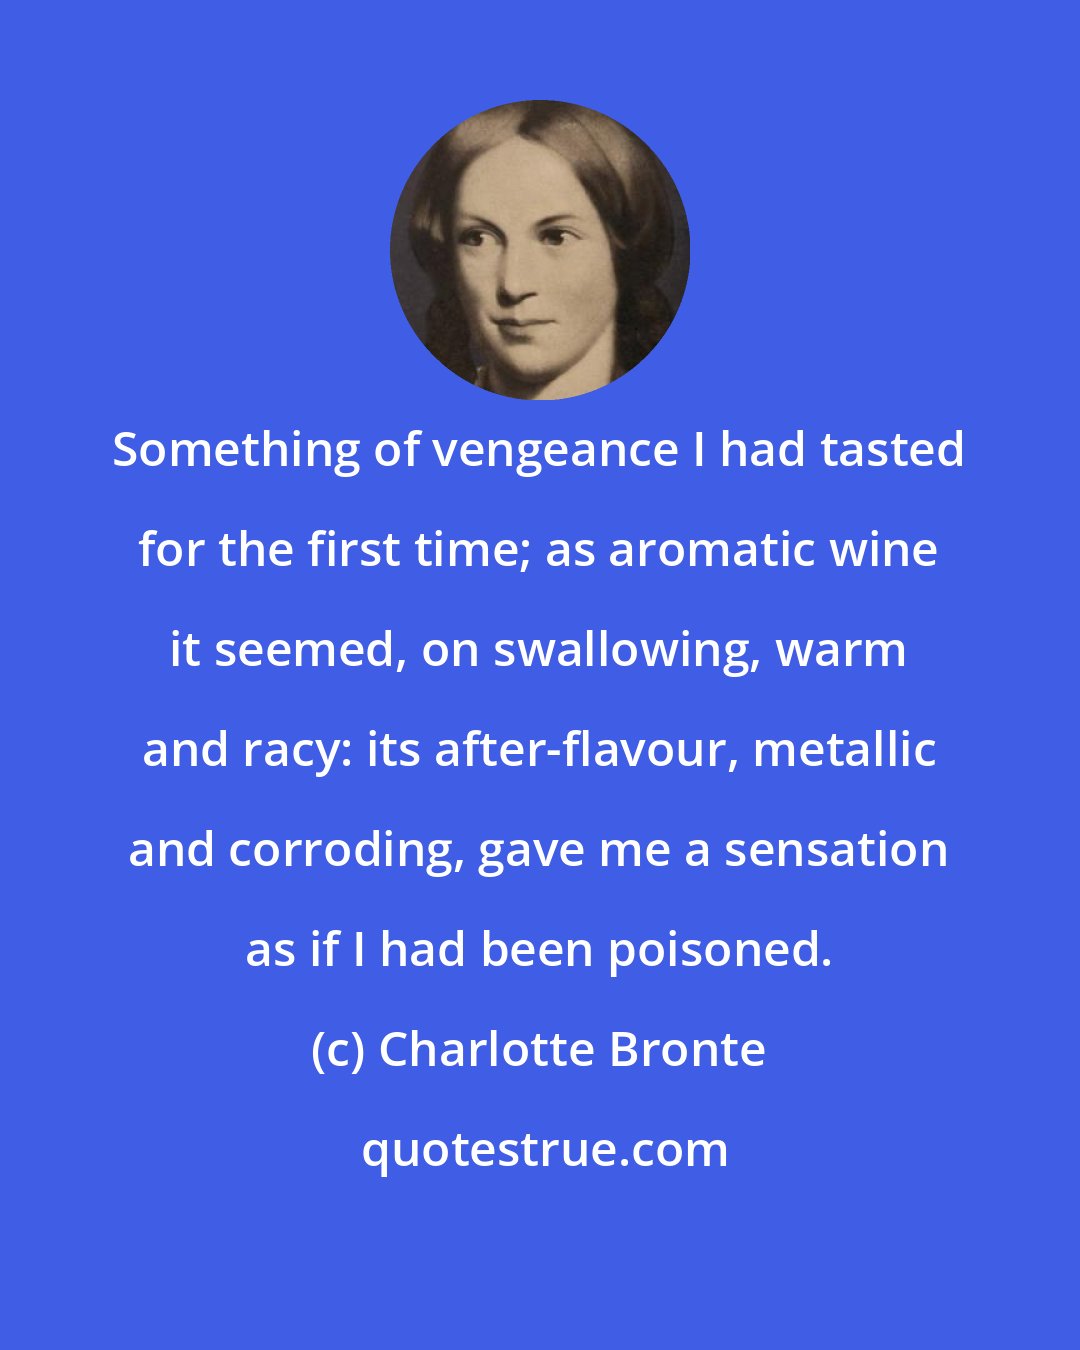 Charlotte Bronte: Something of vengeance I had tasted for the first time; as aromatic wine it seemed, on swallowing, warm and racy: its after-flavour, metallic and corroding, gave me a sensation as if I had been poisoned.